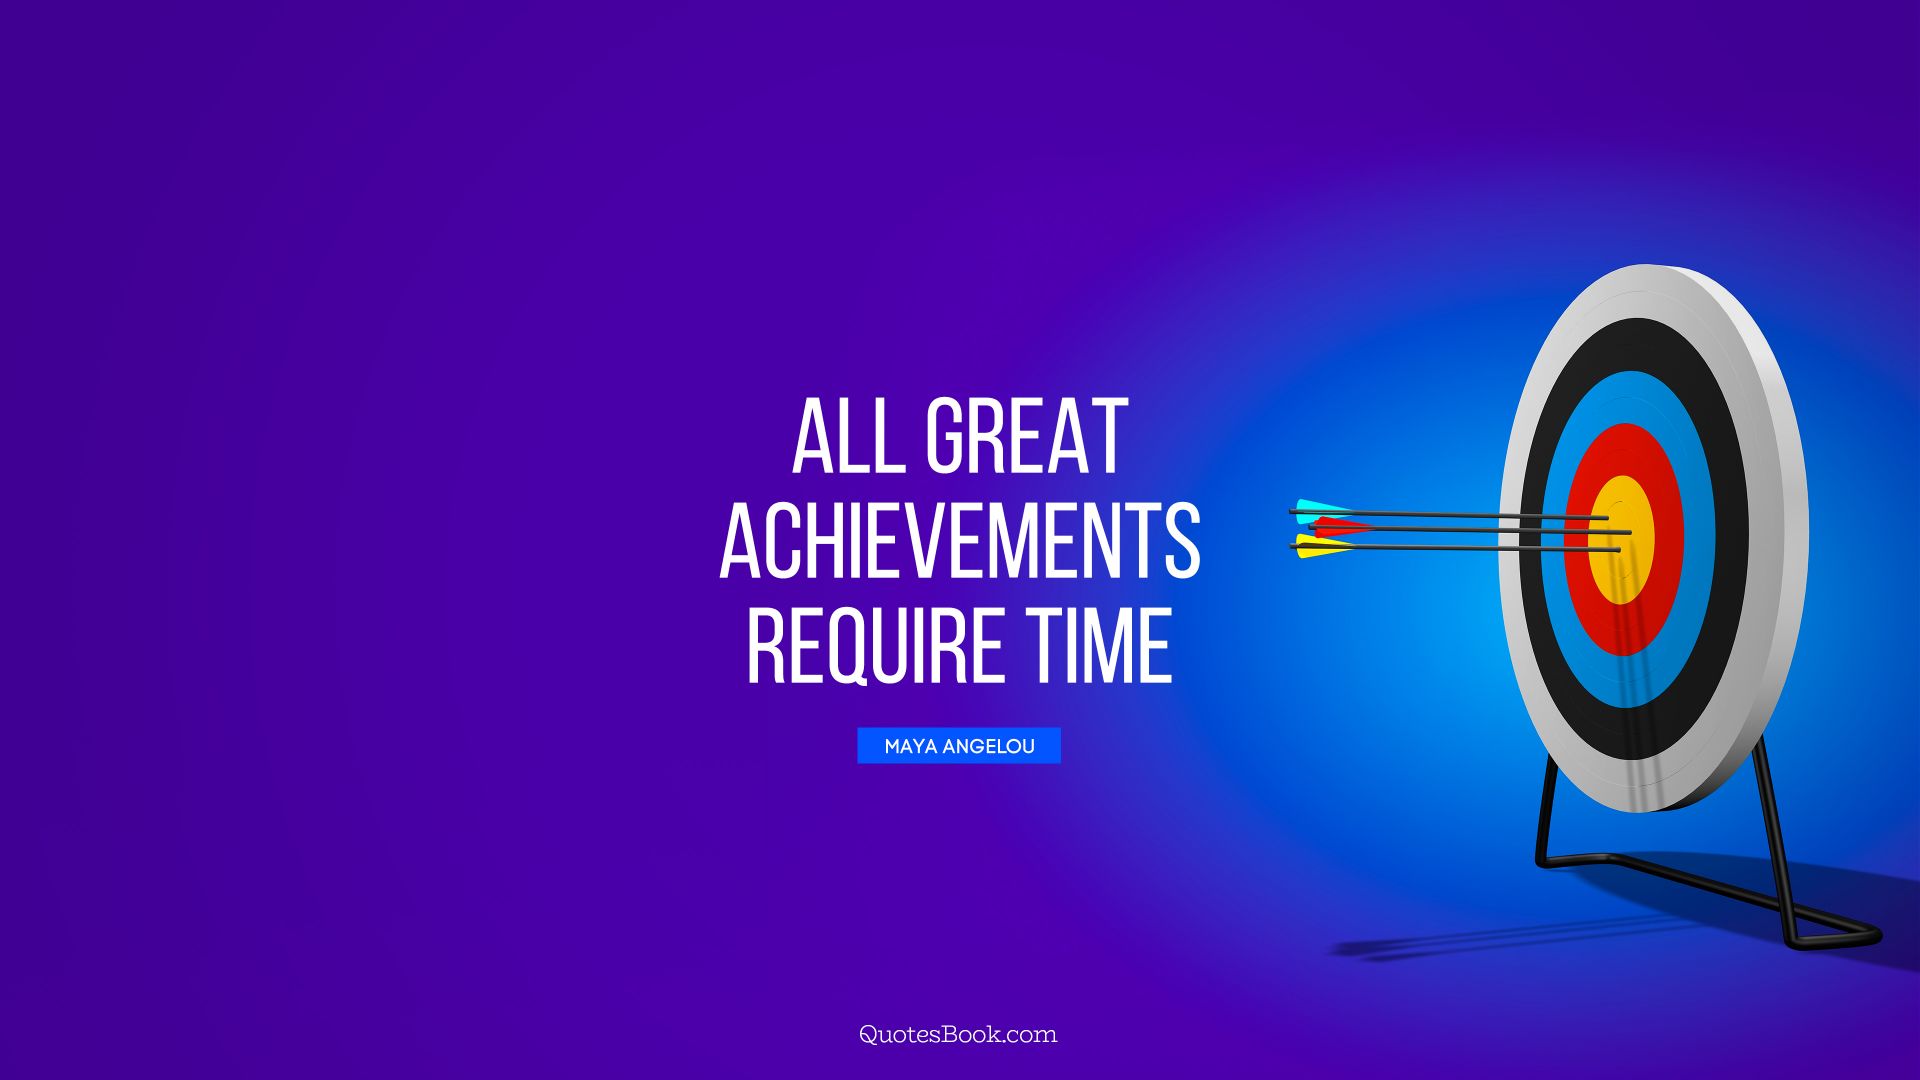 All great achievements require time. - Quote by Maya Angelou